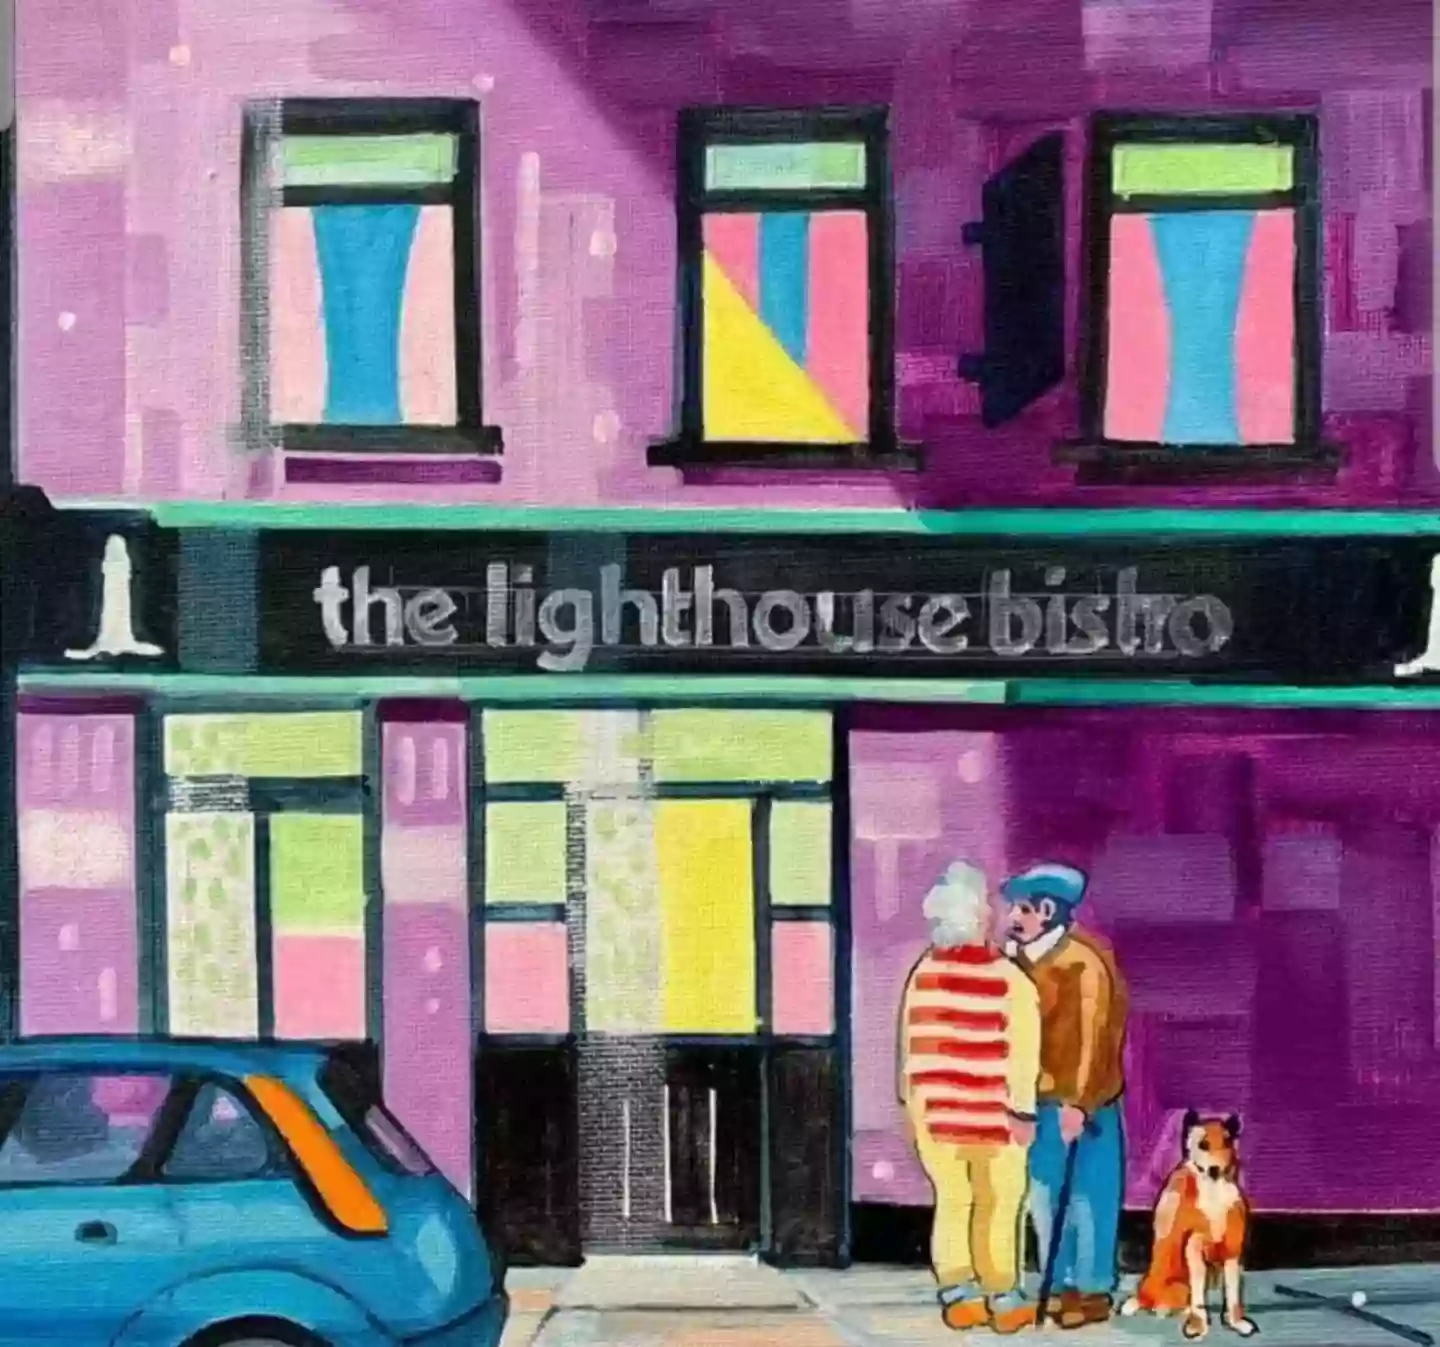 The Lighthouse Bistro